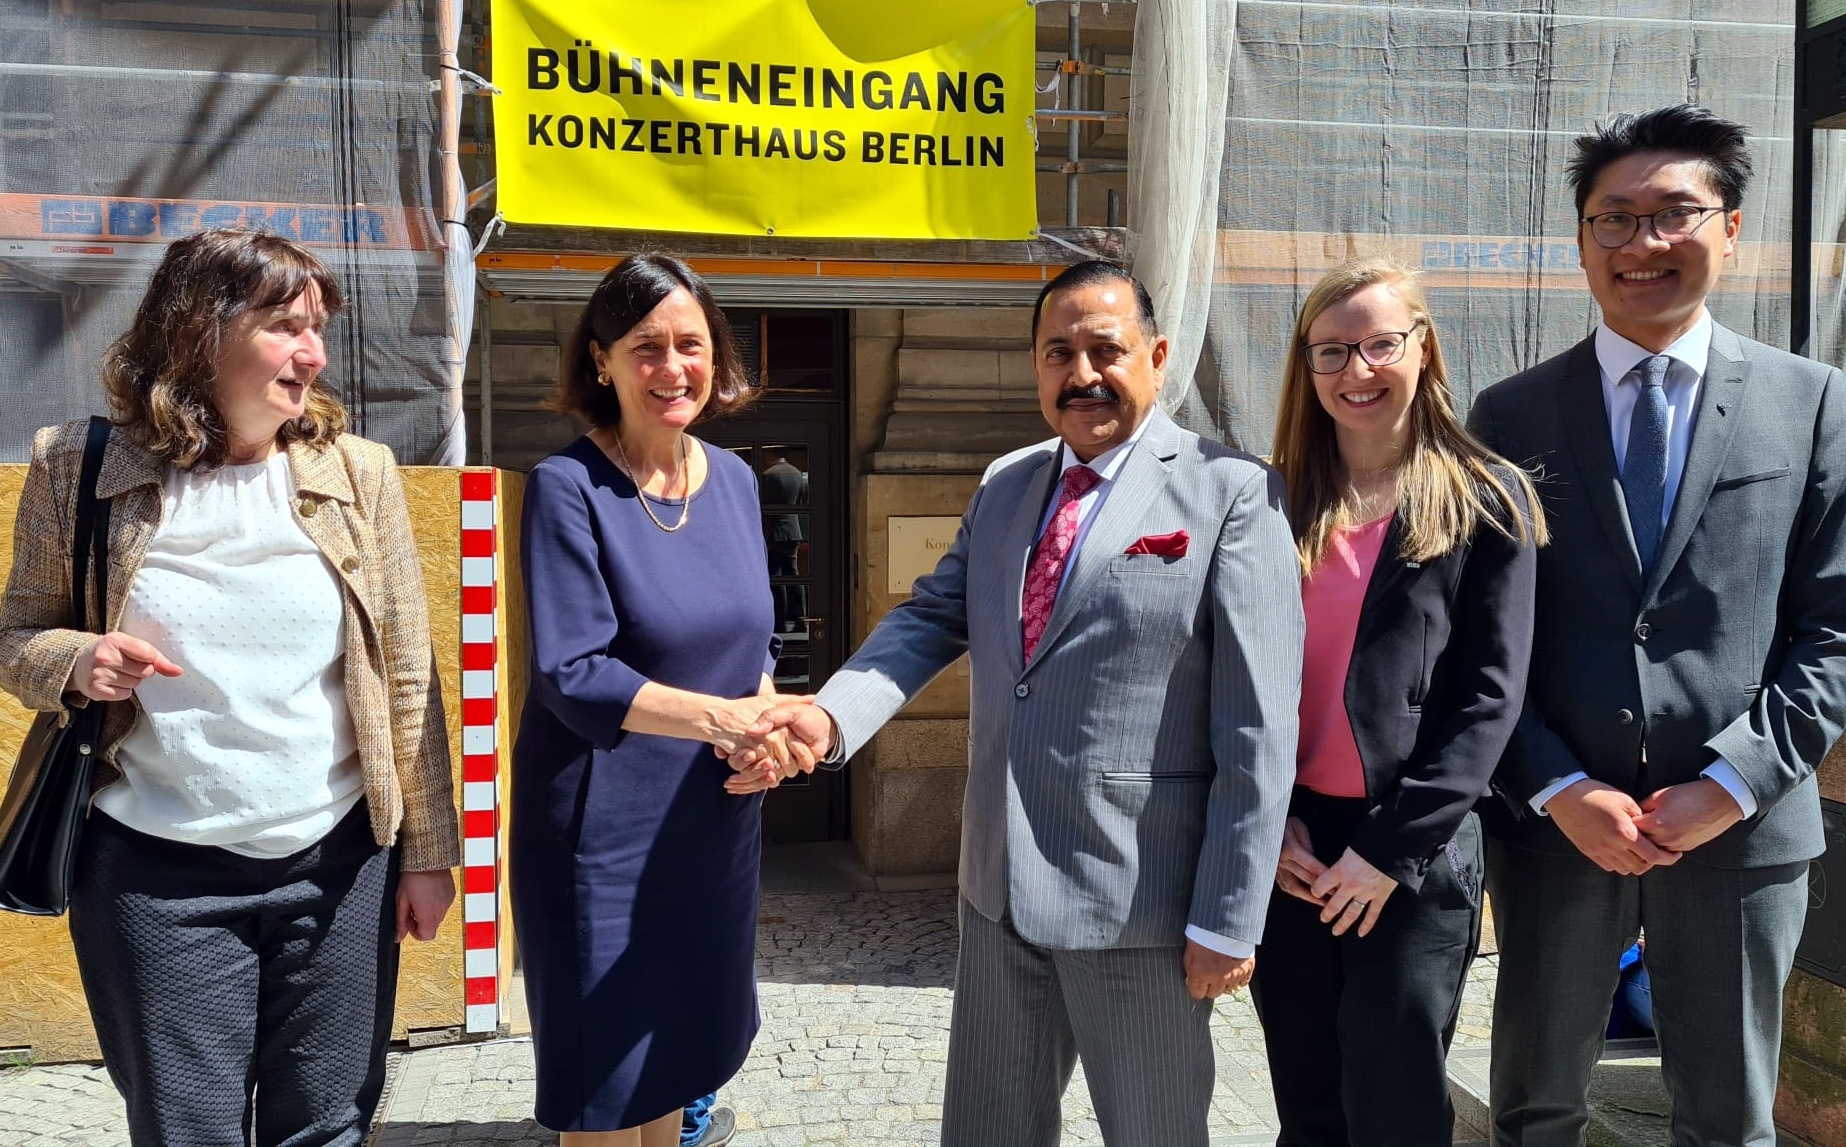 The Minister of State for Science & Technology and Earth Sciences (I/C), Prime Minister's Office, Dr. Jitendra Singh being received by the President, DFG (German Research Foundation), Prof. (Dr) Katja Becker, at Berlin, in Germany on May 04,2022.